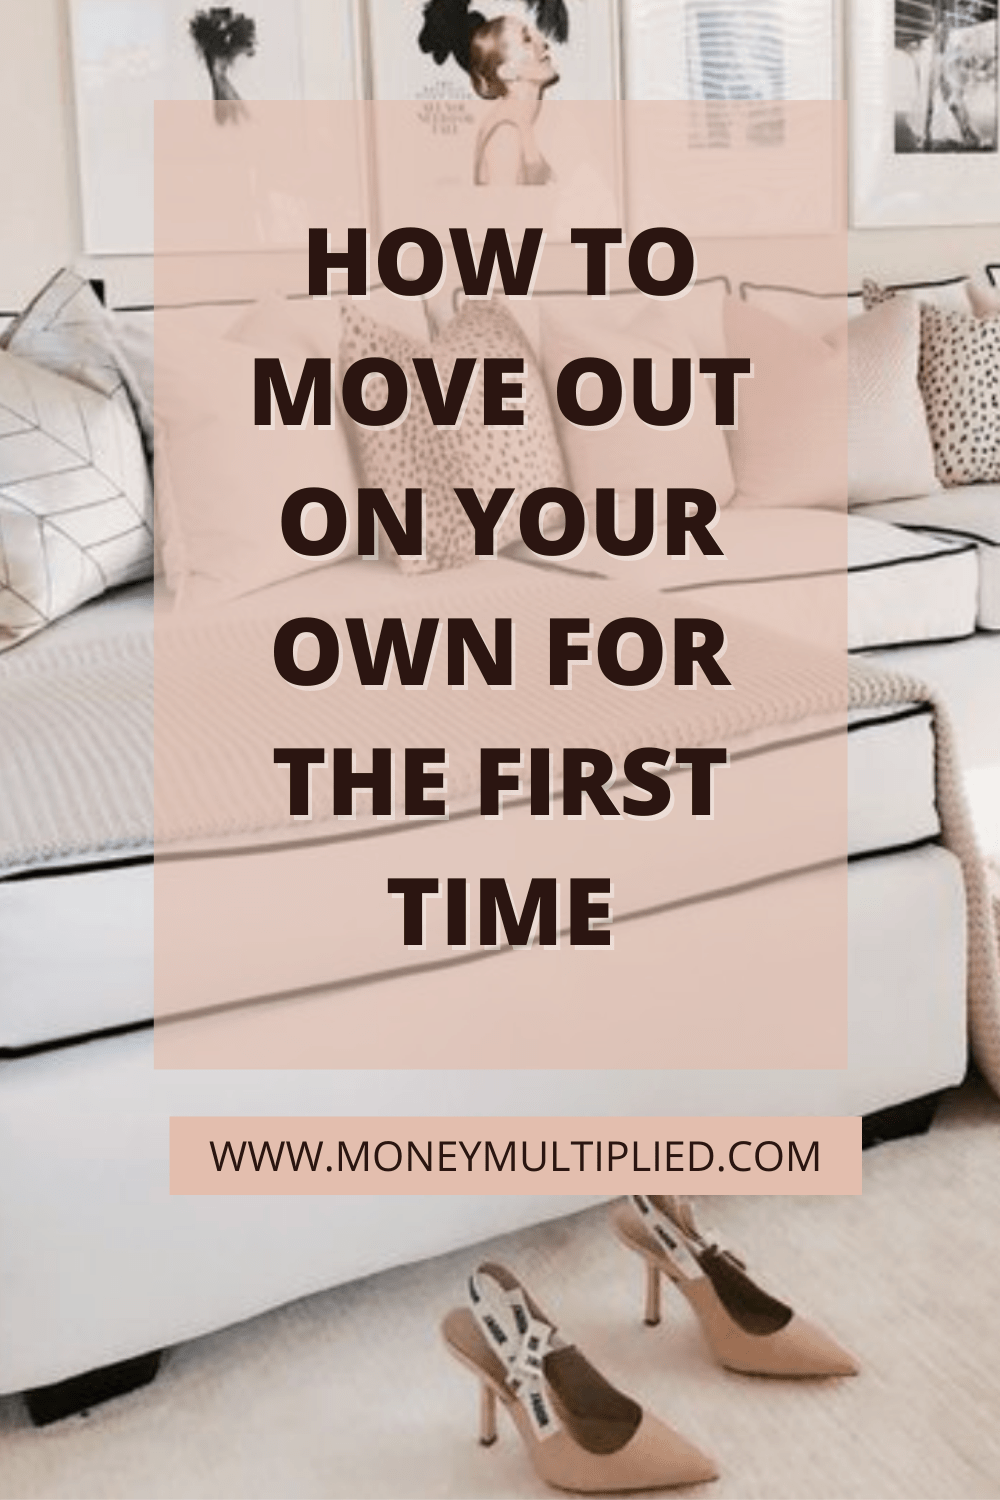 How to move out on your own for the first time